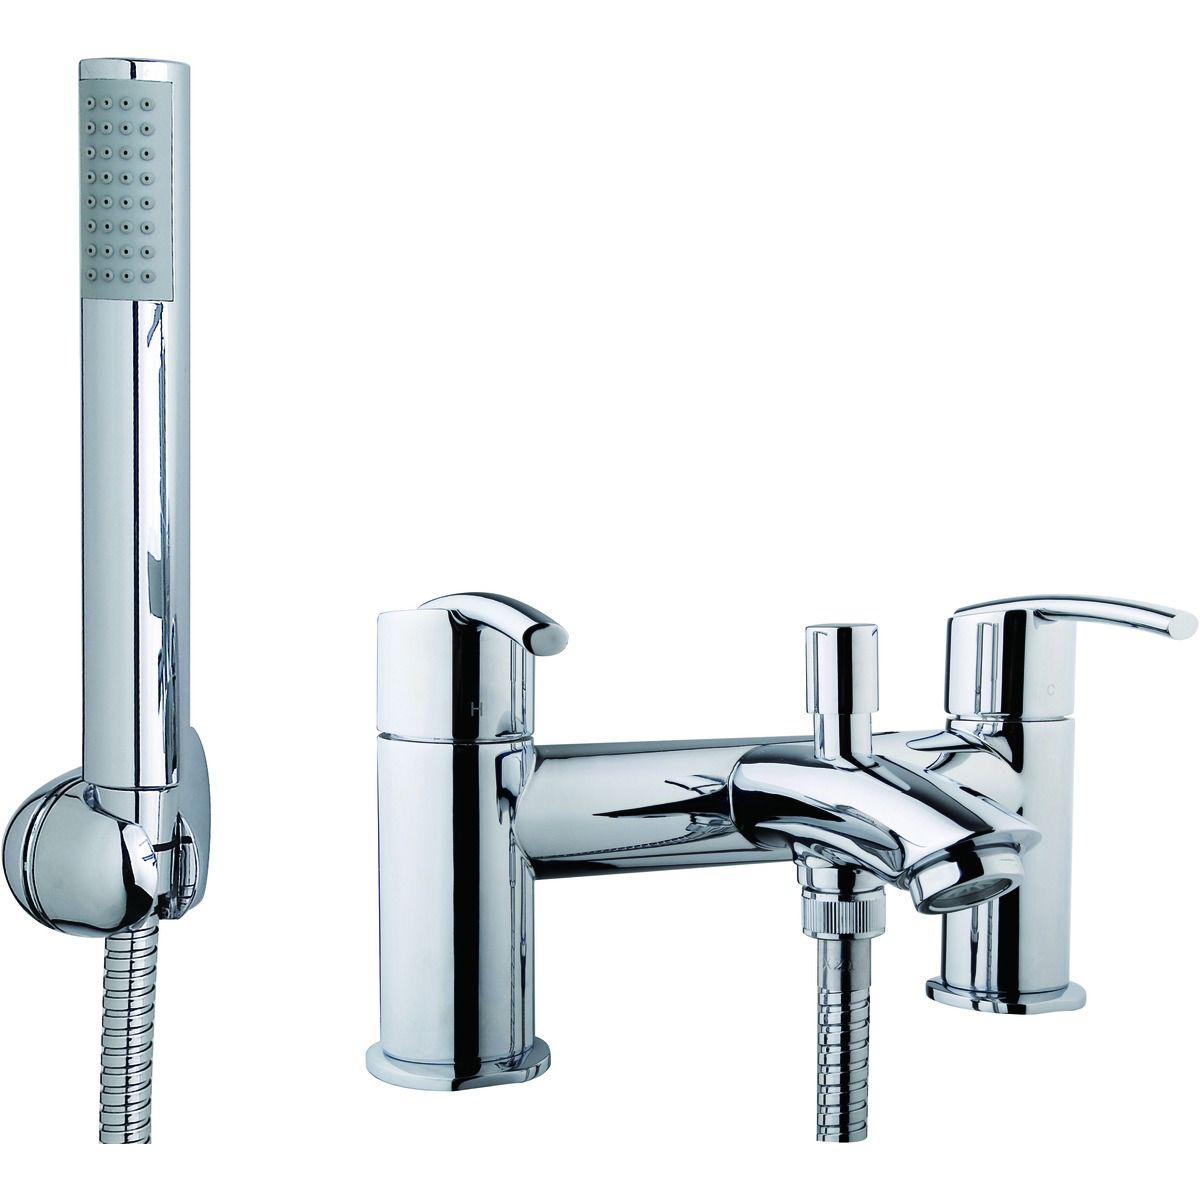 Image of Wickes Versaille Bath Shower Mixer Tap - Chrome